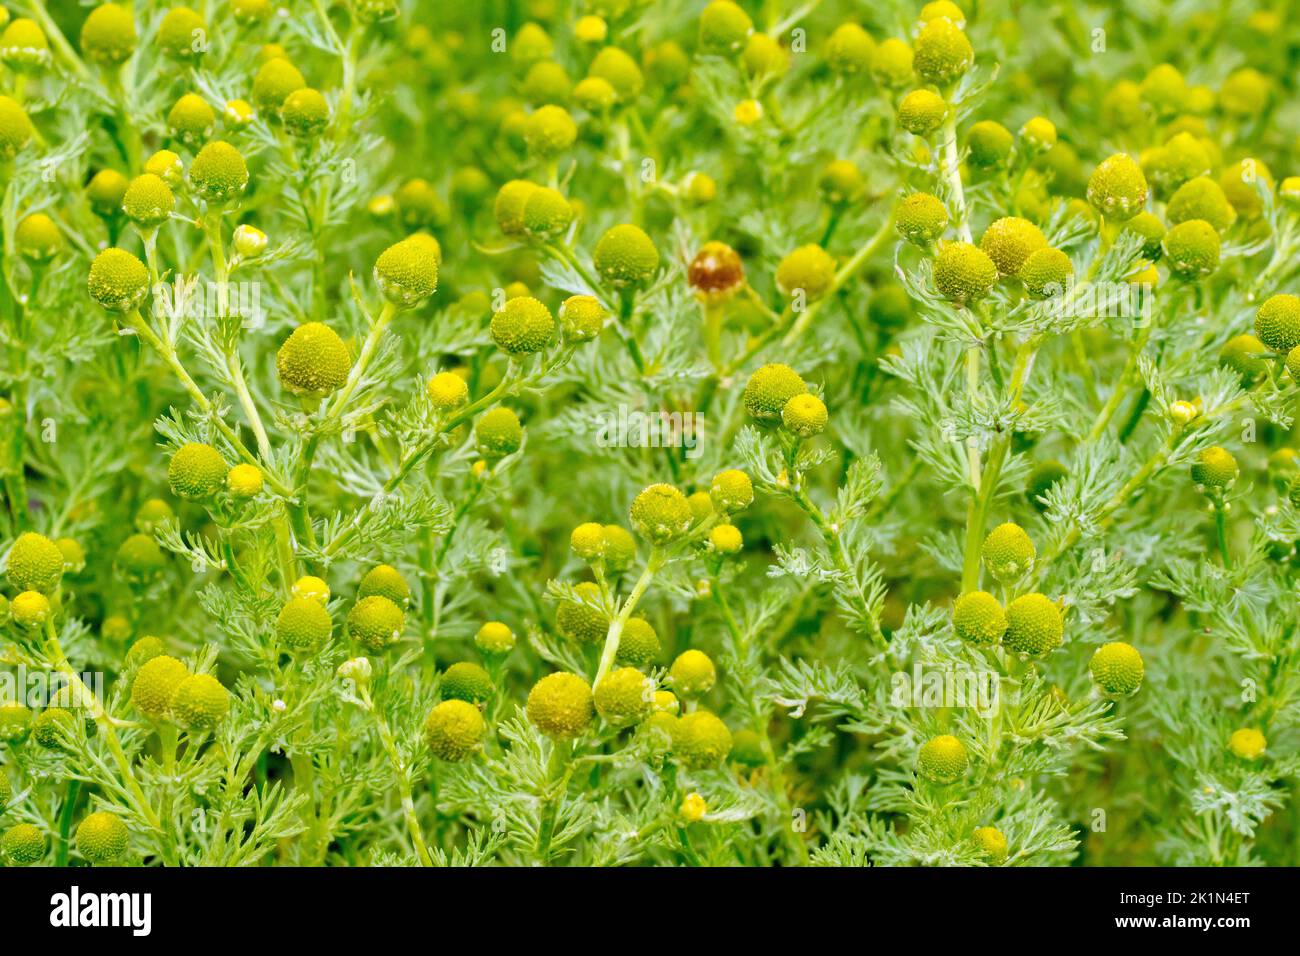 Pineappleweed ou Pineapple Mayweed (matricaria matricarioides ou chamomilla suaveolens), gros plan d'une masse de l'herbe commune des lieux ouverts. Banque D'Images